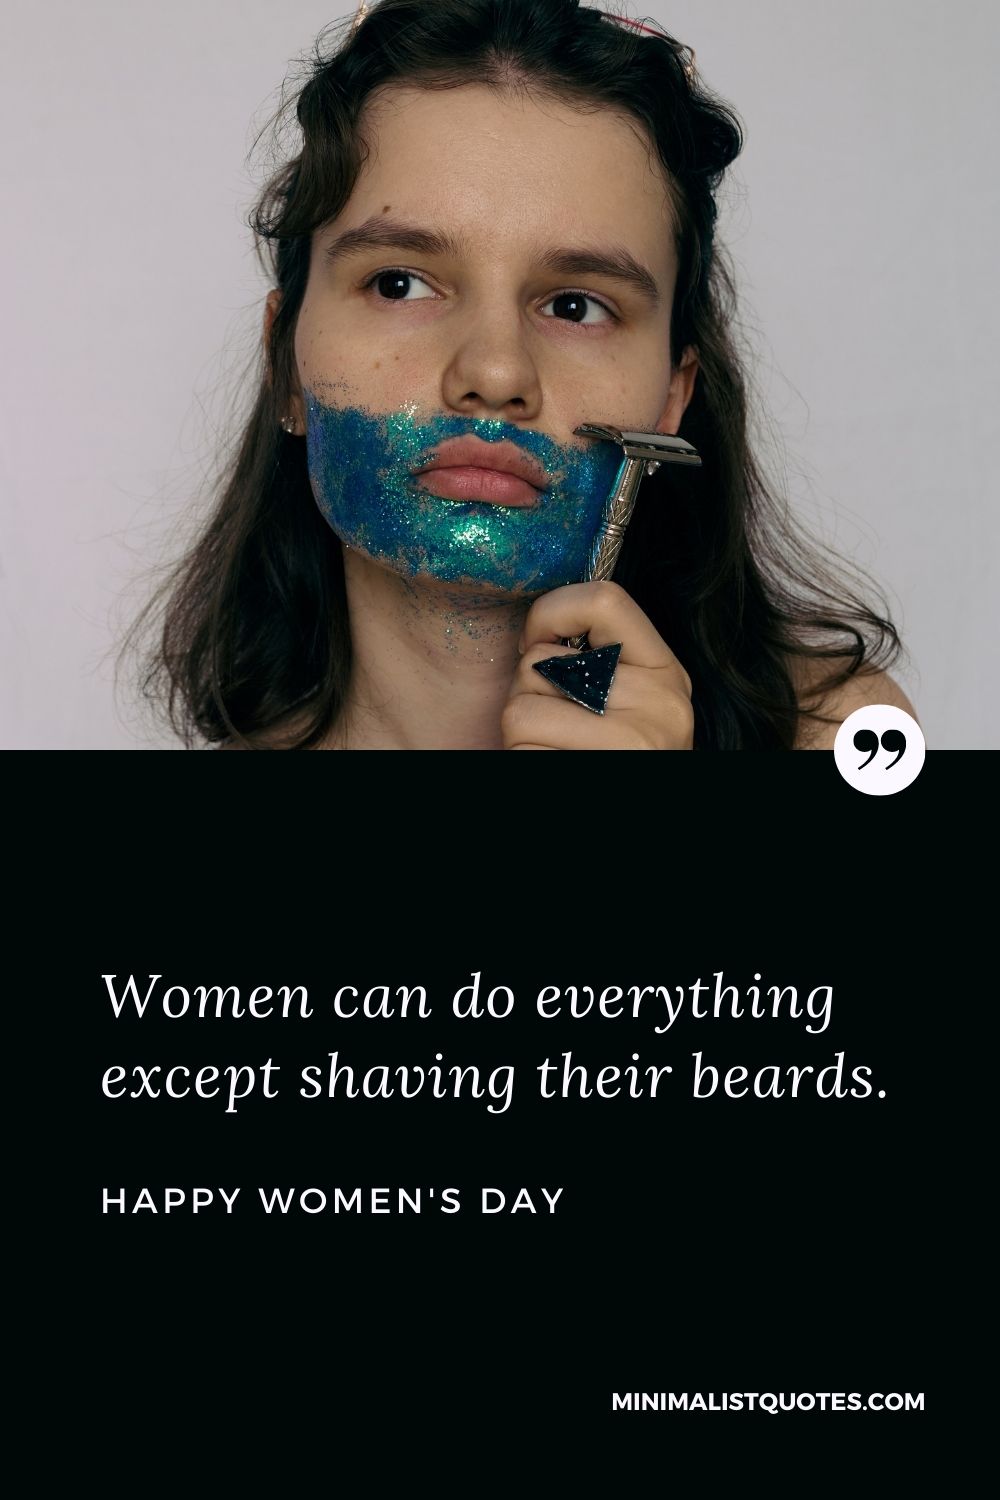 Women's Day Wish: Women can do everything except shaving their beards.